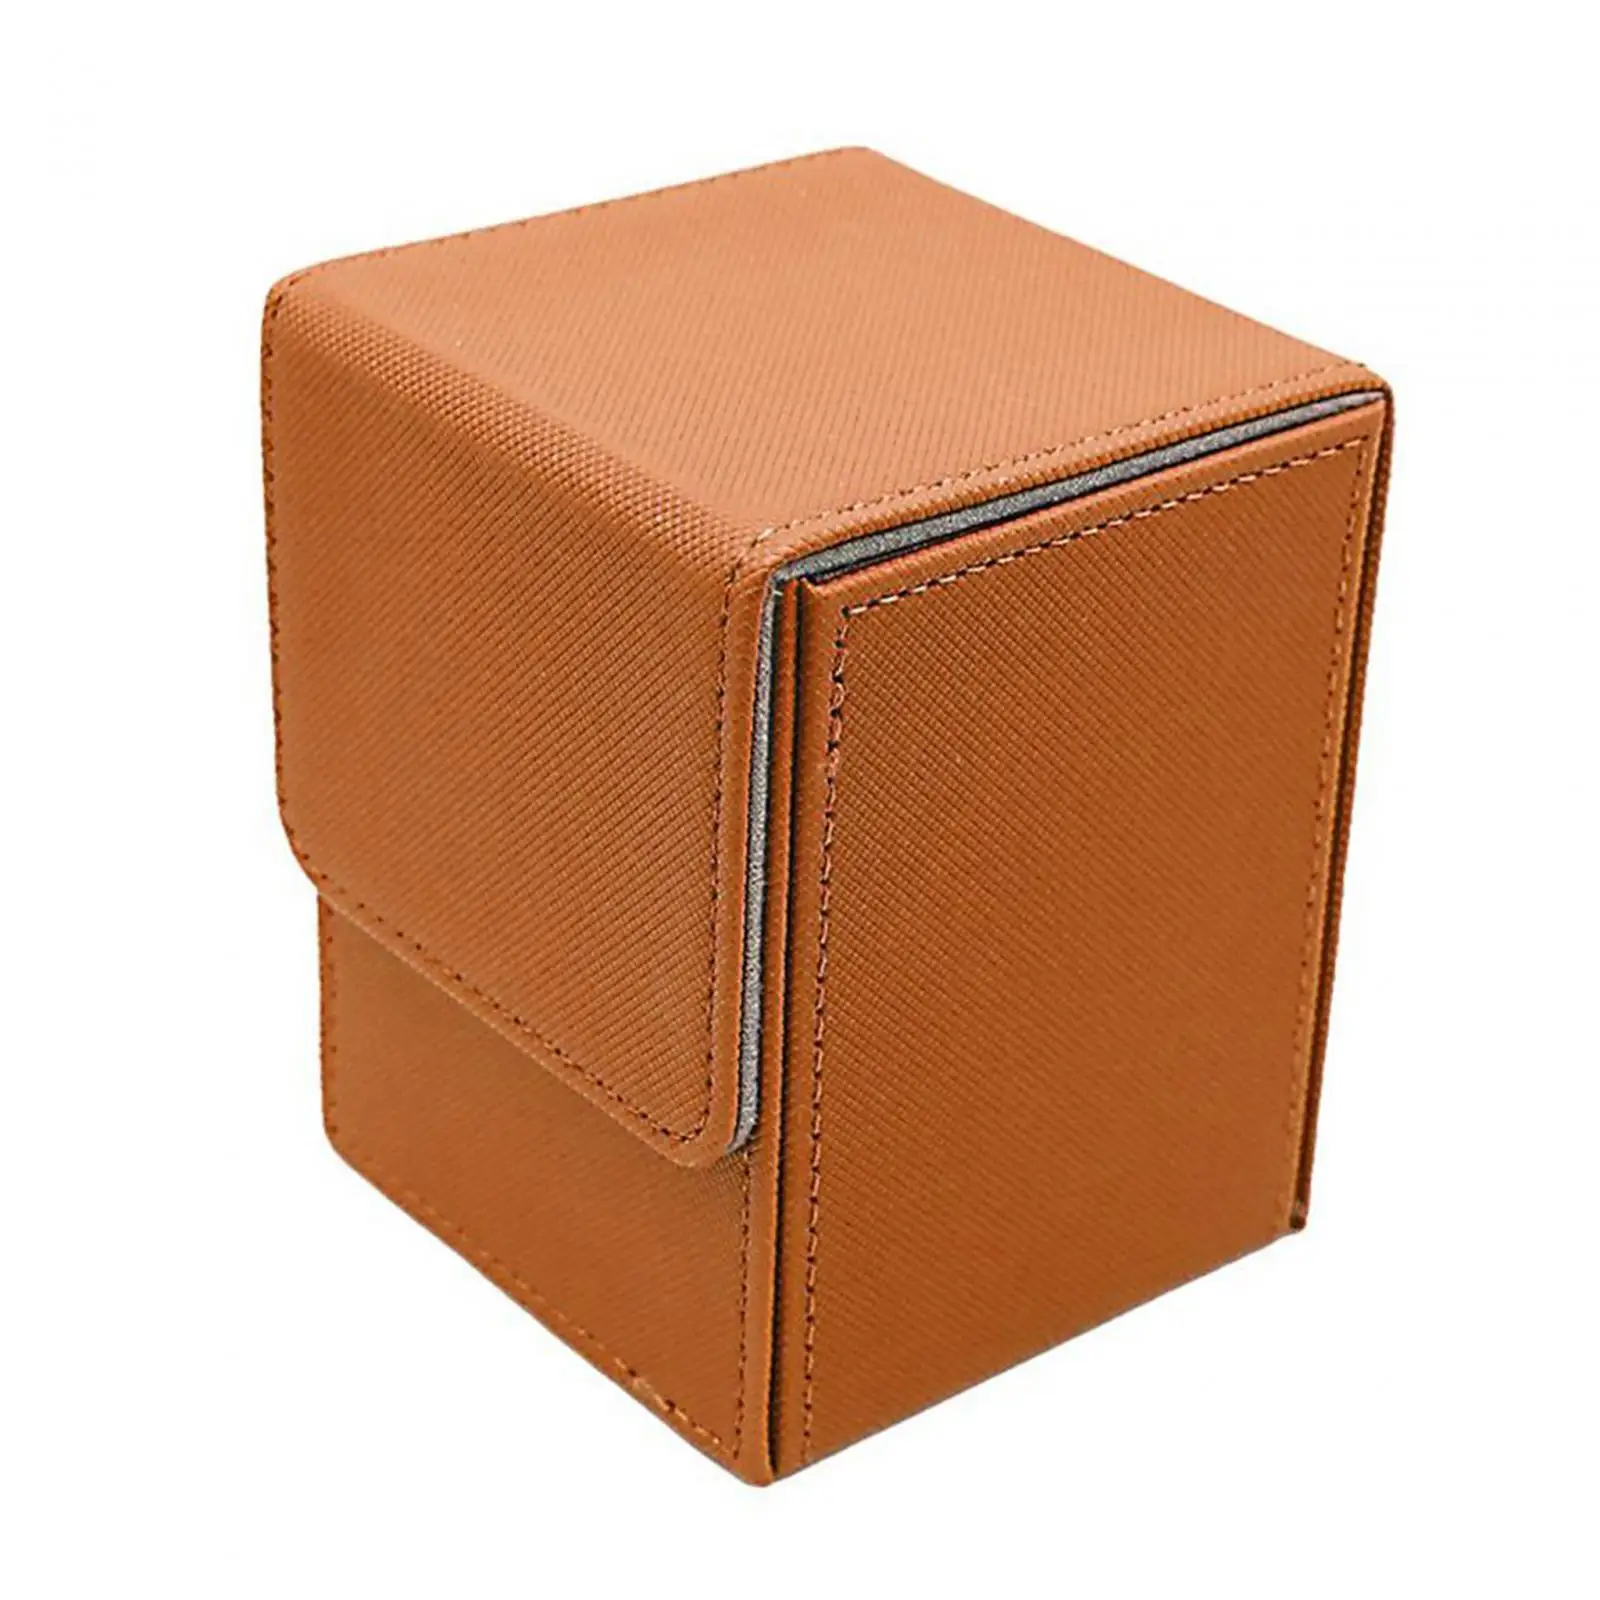 Trading Card Deck Case PU Leather Display Holds 100 Cards Kids Children Storage Gathering Card Toy Card Cards Case